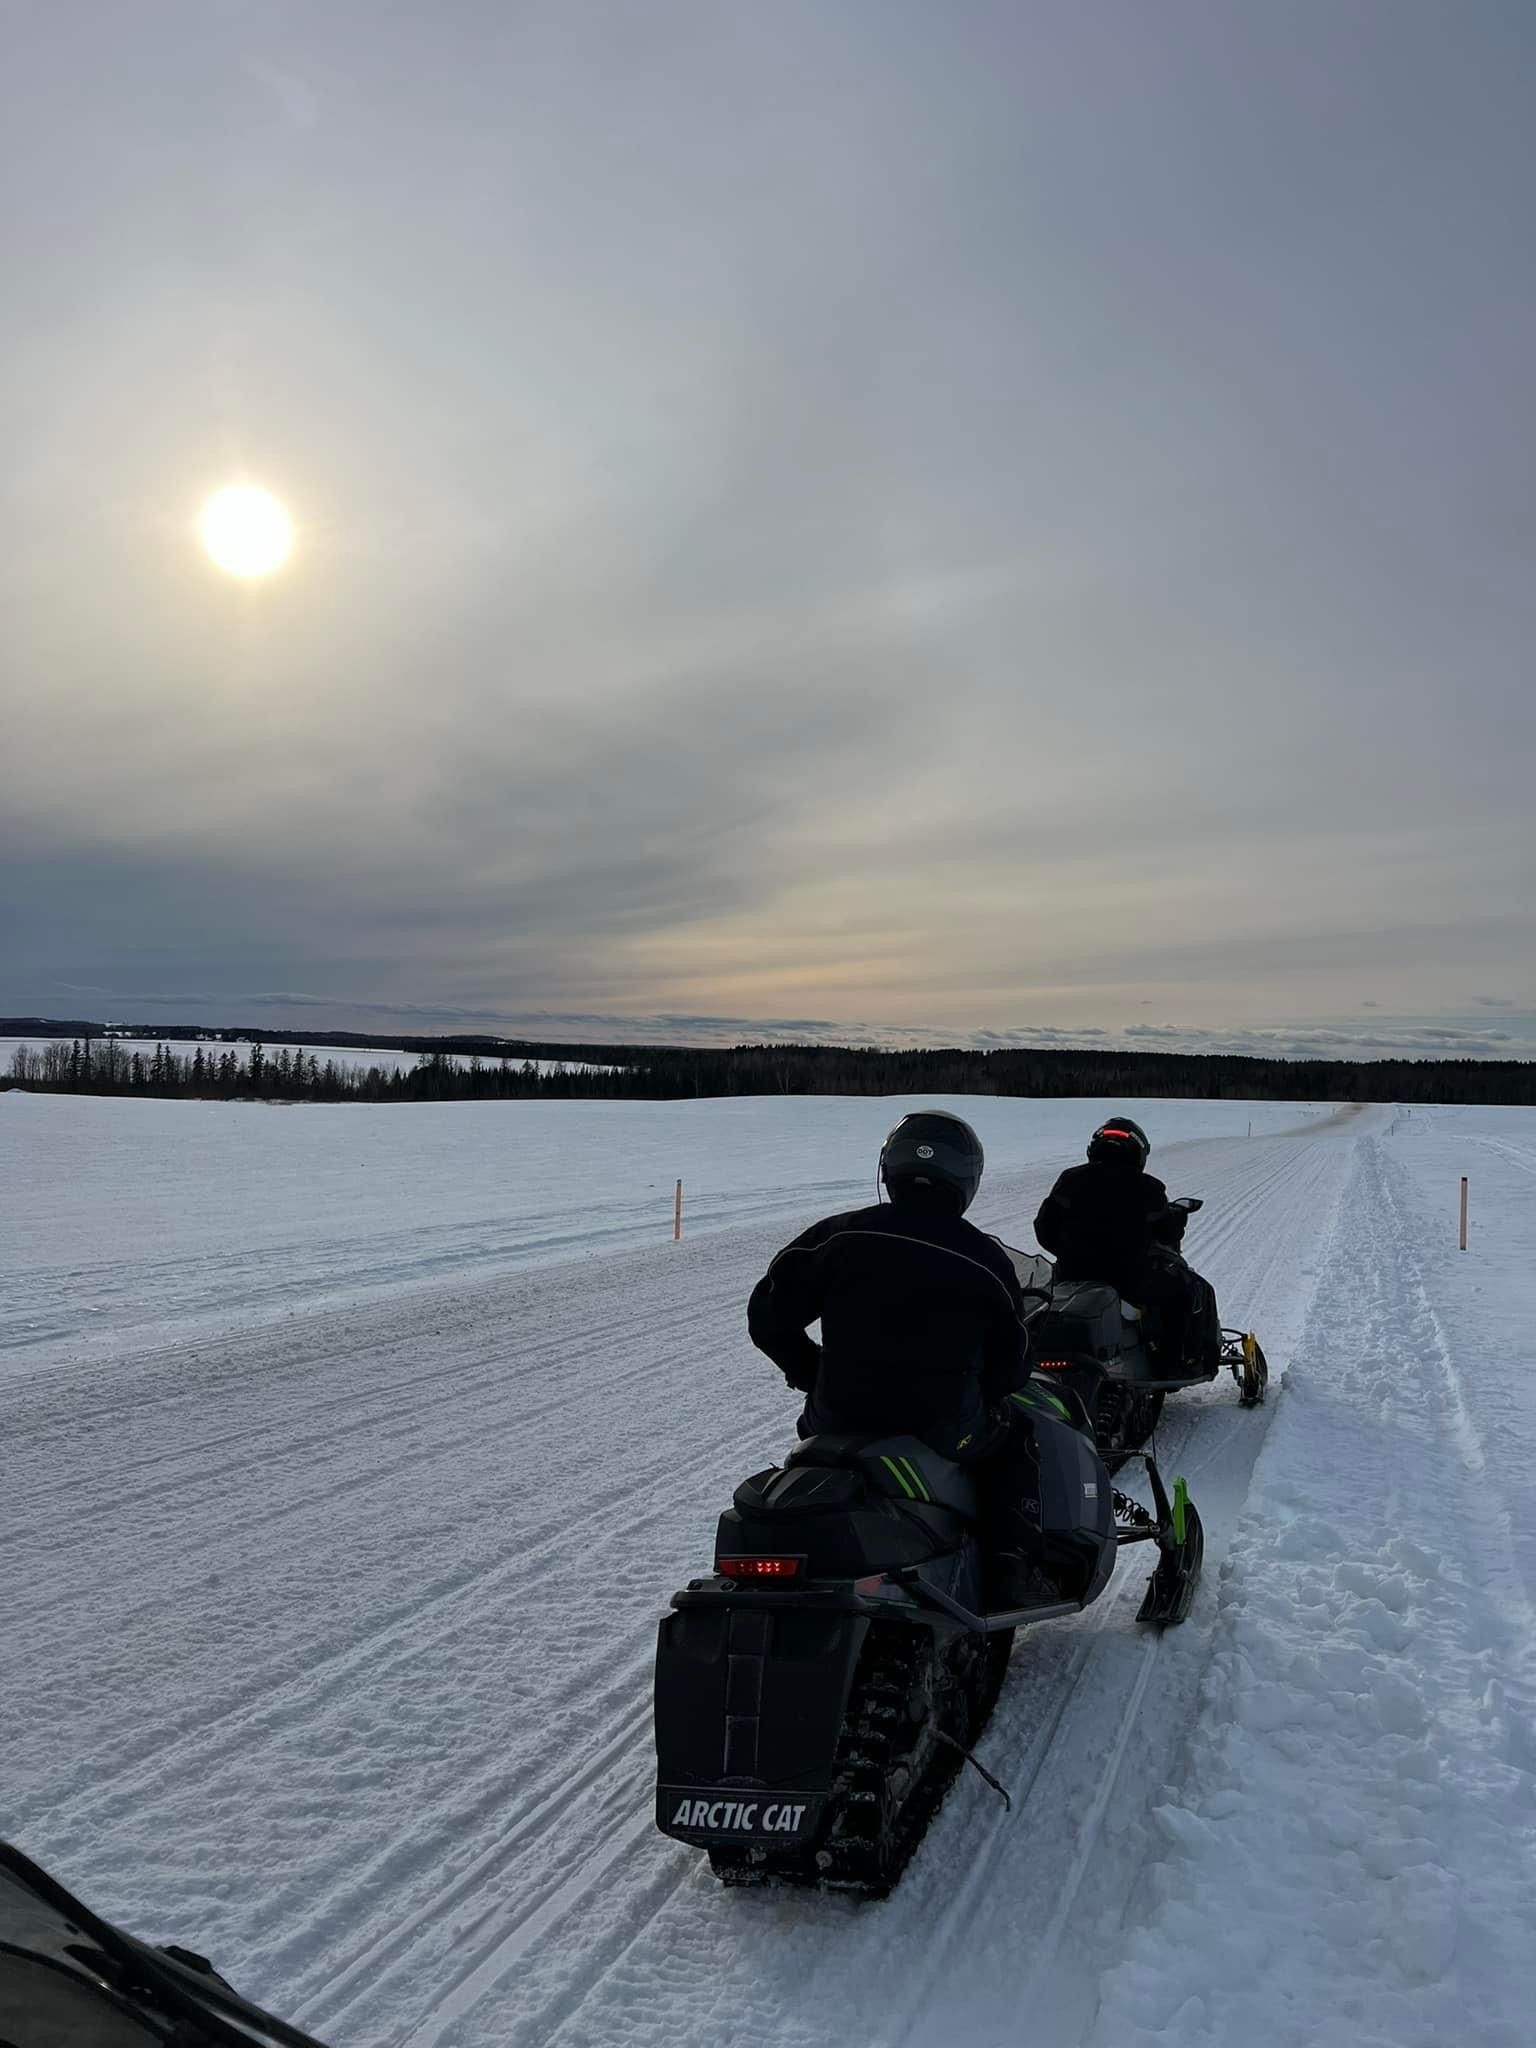 a group of people are riding snowmobiles down a snowy road .